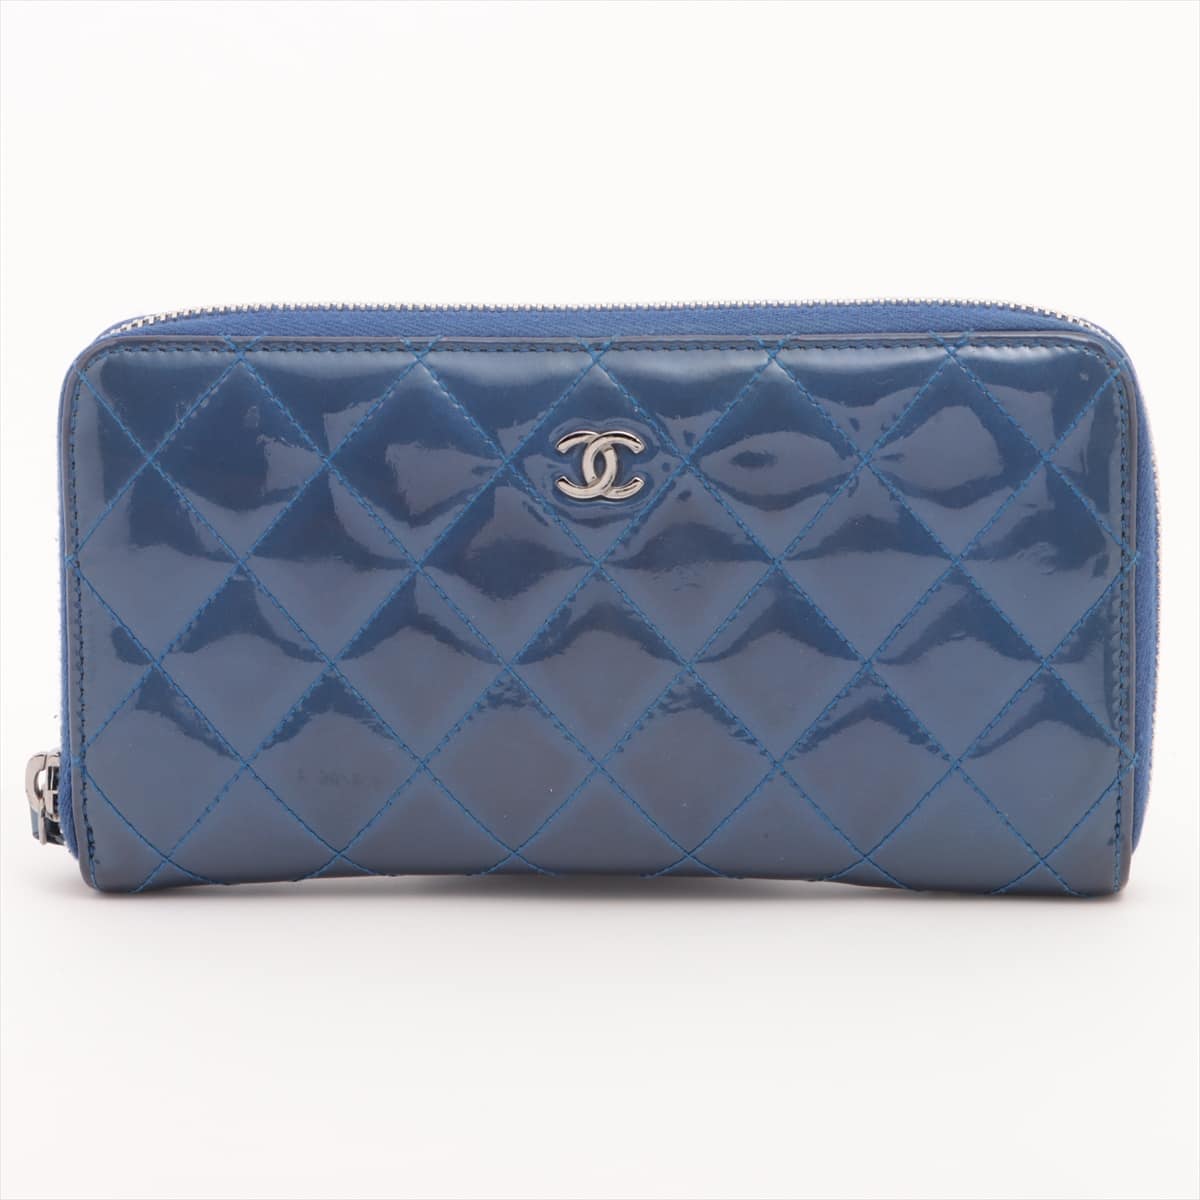 Chanel Matelasse Patent leather Round-Zip-Wallet Blue Silver Metal fittings 17XXXXXX